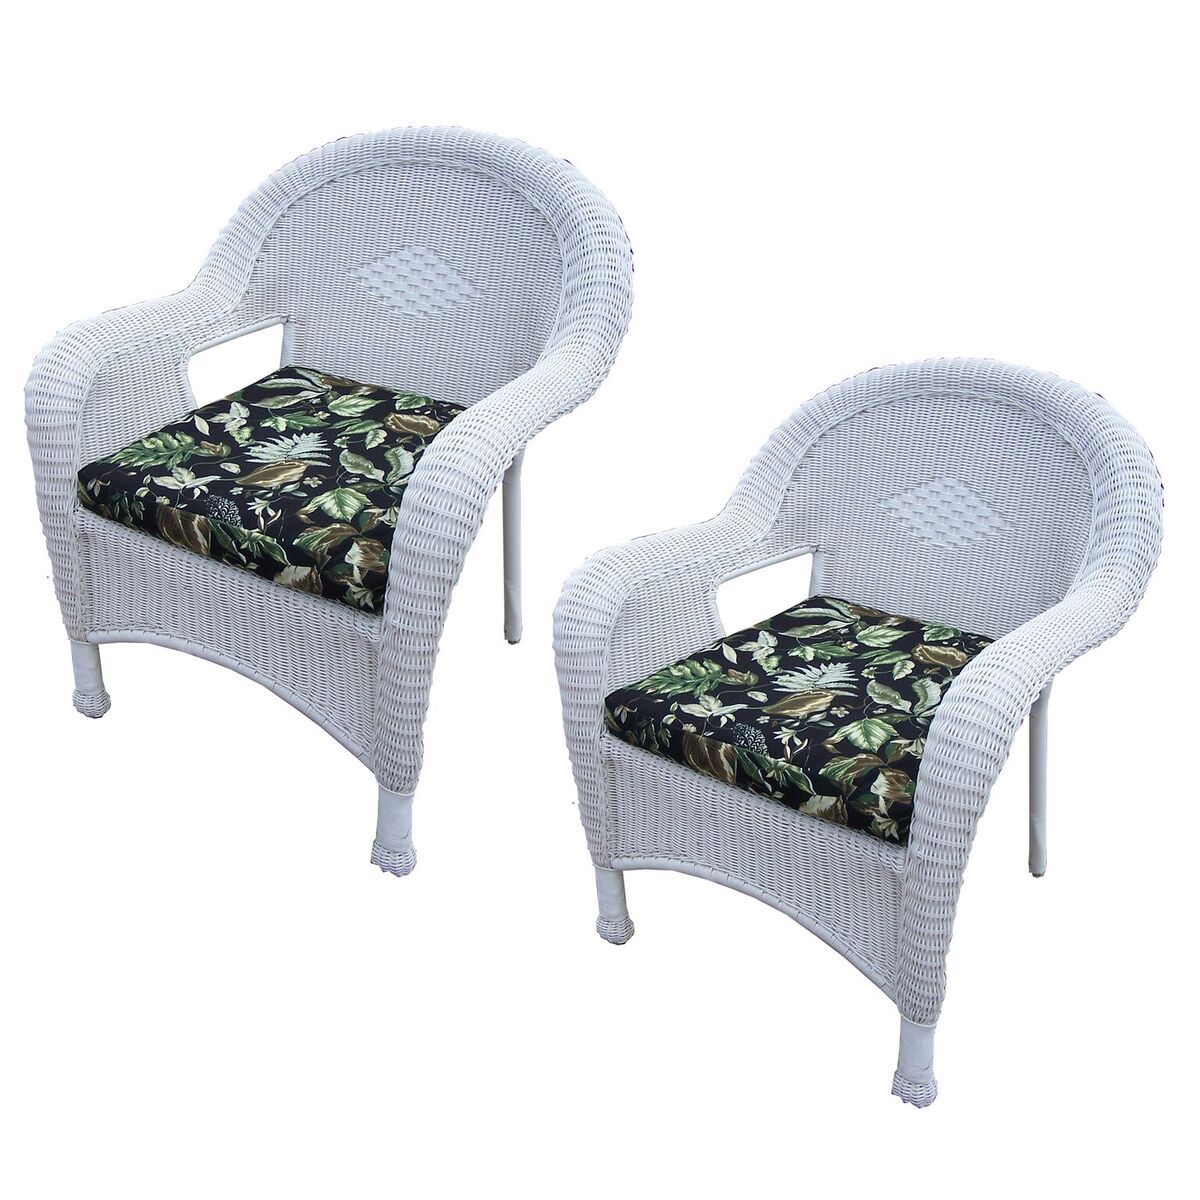 Pack Of 2 Bright White Stylish Outdoor Patio Resin Wicker Arm Chairs Pertaining To Rattan Wicker Outdoor Seating Sets (View 15 of 15)